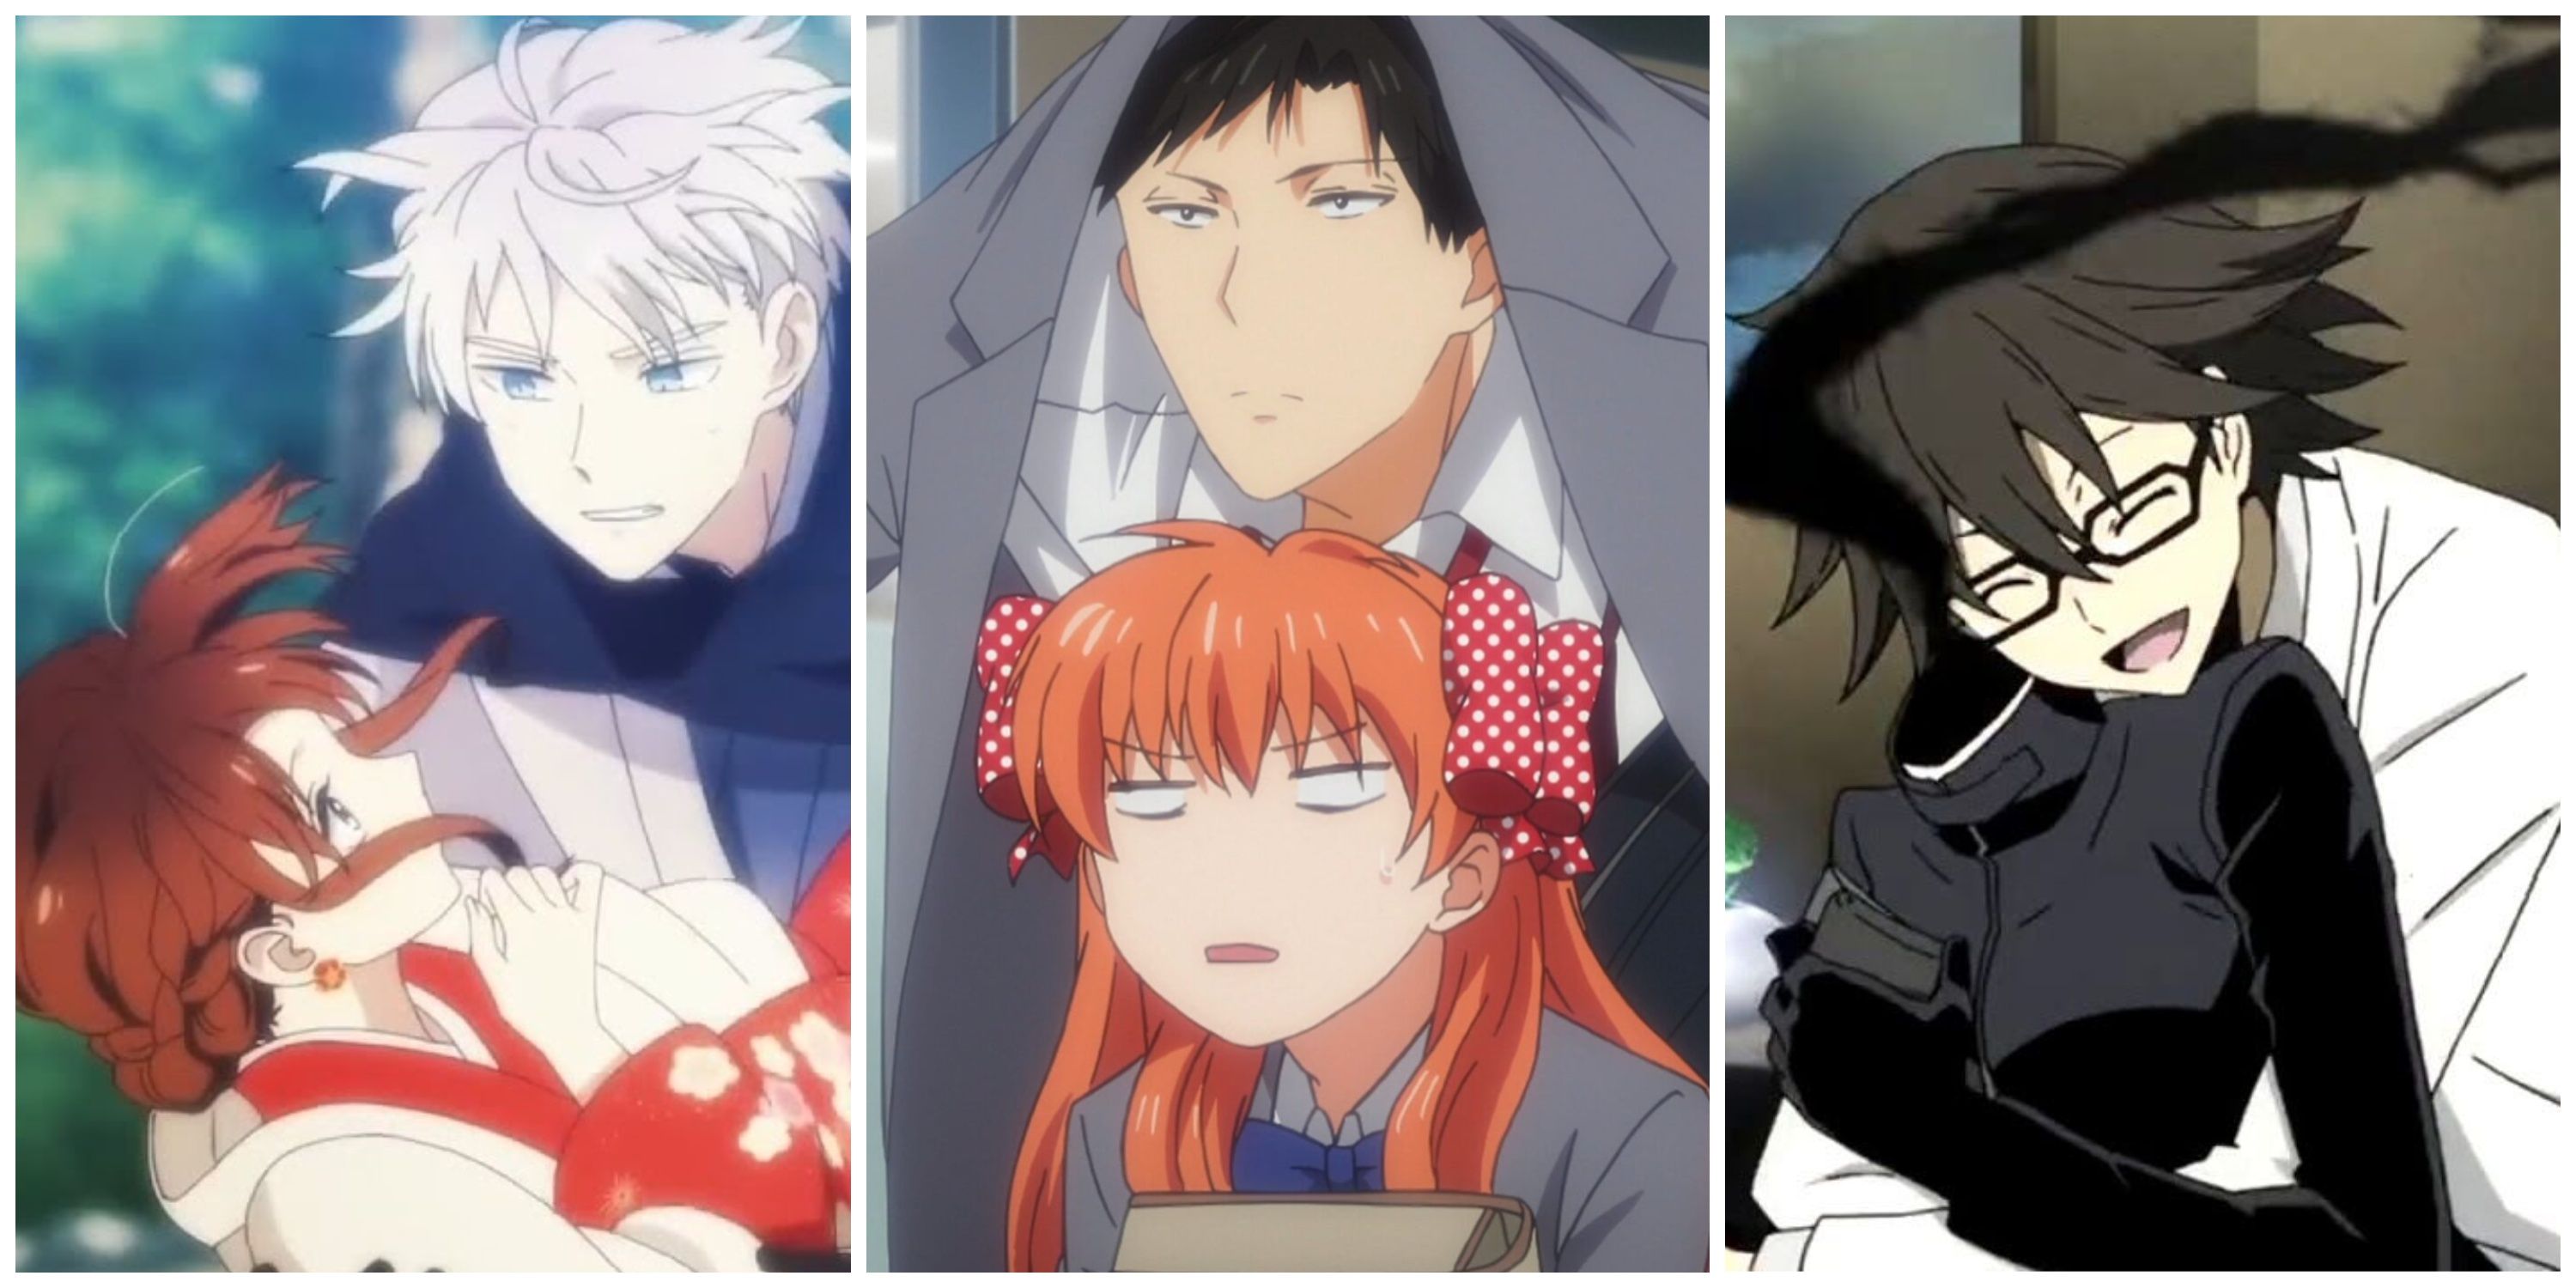 Split image, Himuro catching Fuyutsuki in The Ice Guy and His Cool Female Colleague, Nozaki goofing around with Chiyo in Monthly Girls' Nozaki kun, and Shinra hugging Celty in Durarara!